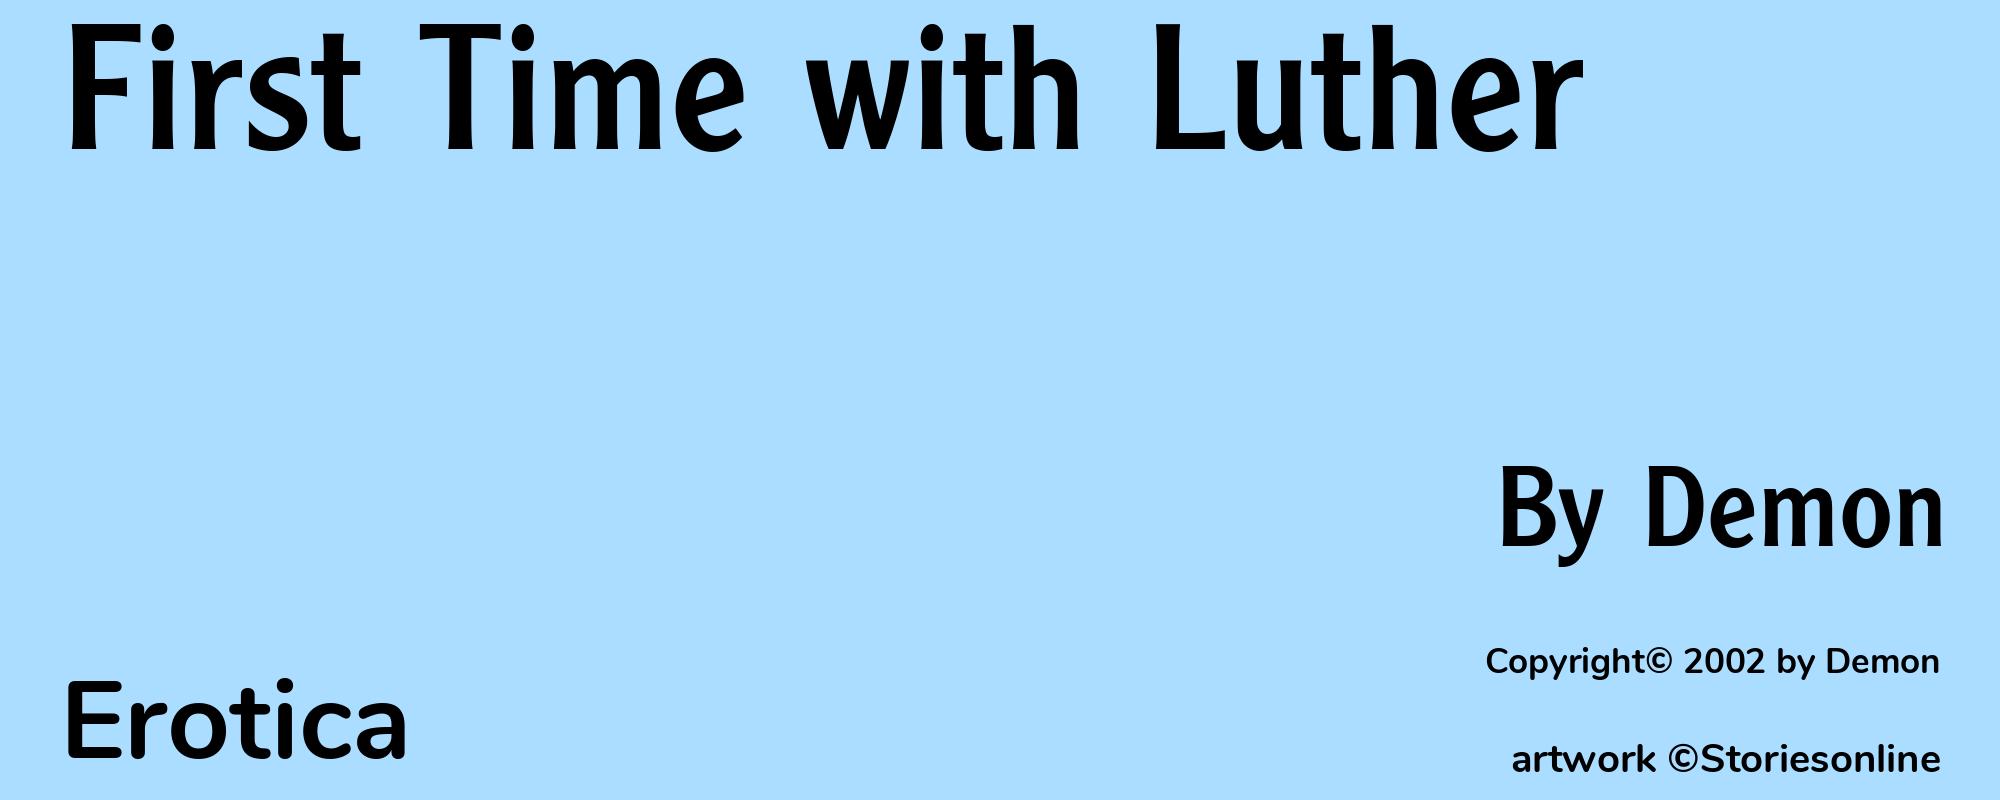 First Time with Luther - Cover